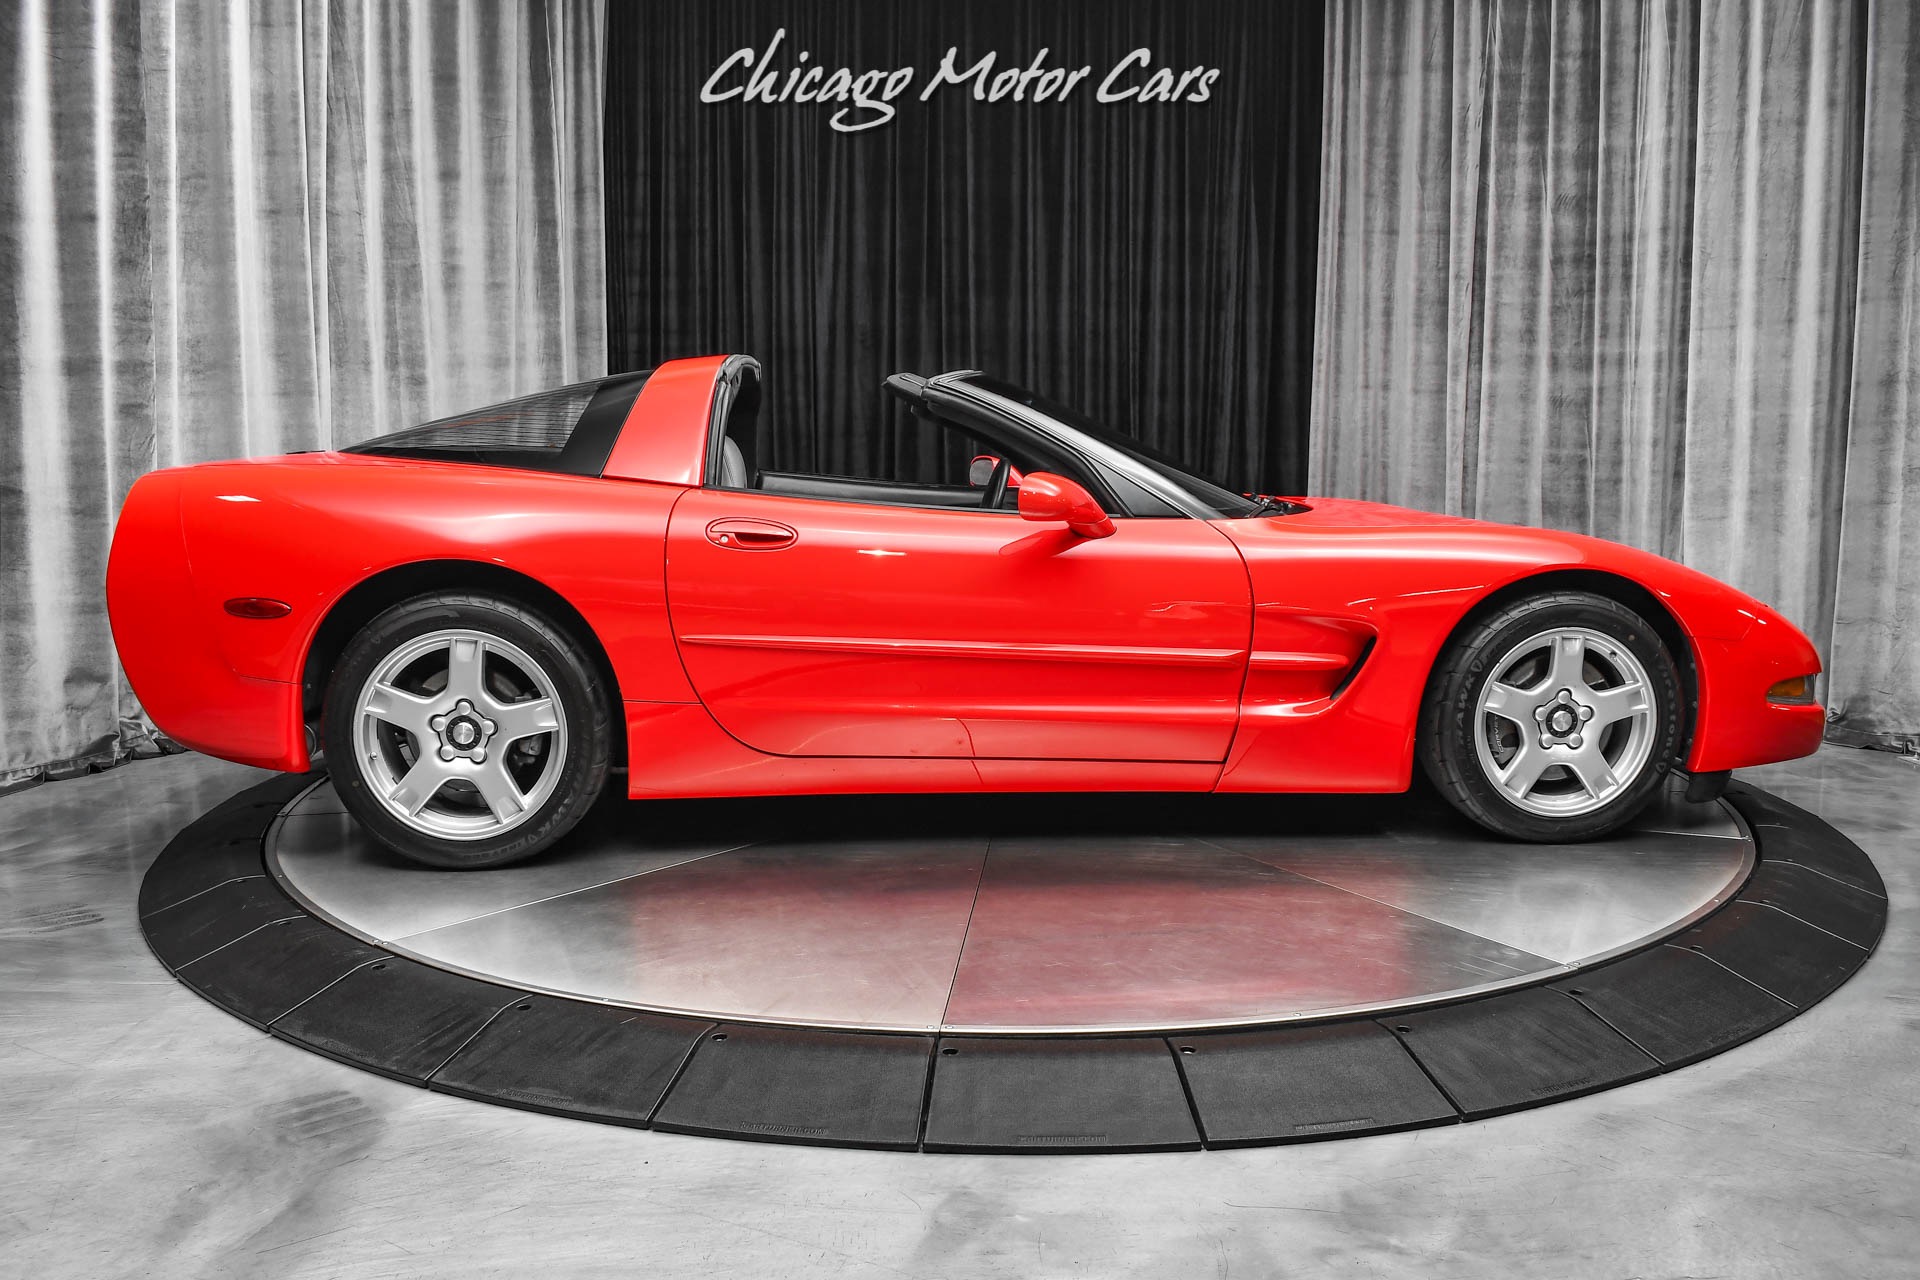 Used-1997-Chevrolet-Corvette-Coupe-ONLY-46k-Miles-Bone-Stock-Well-Equipped-with-Options